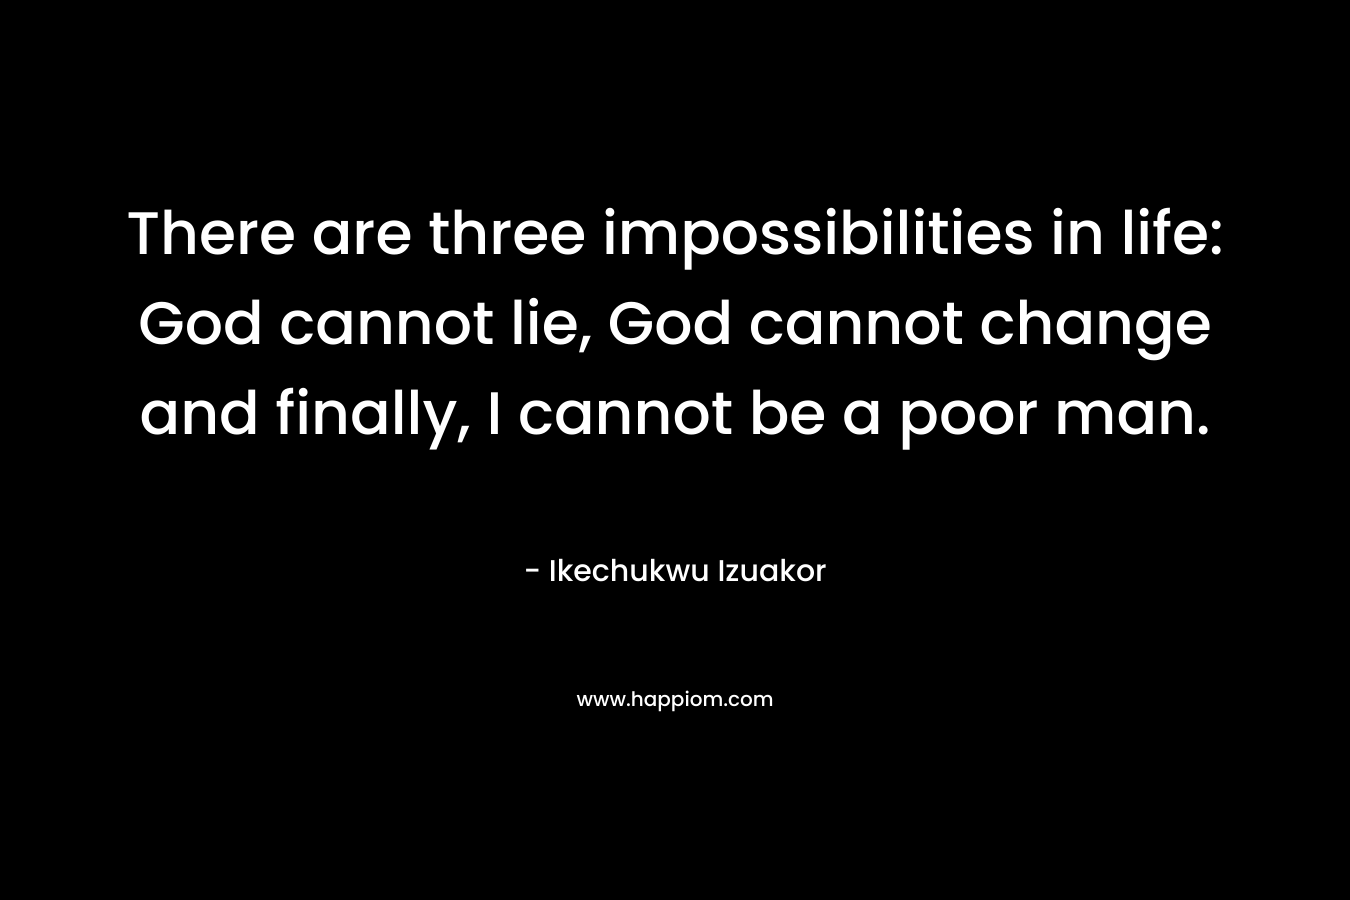 There are three impossibilities in life: God cannot lie, God cannot change and finally, I cannot be a poor man.